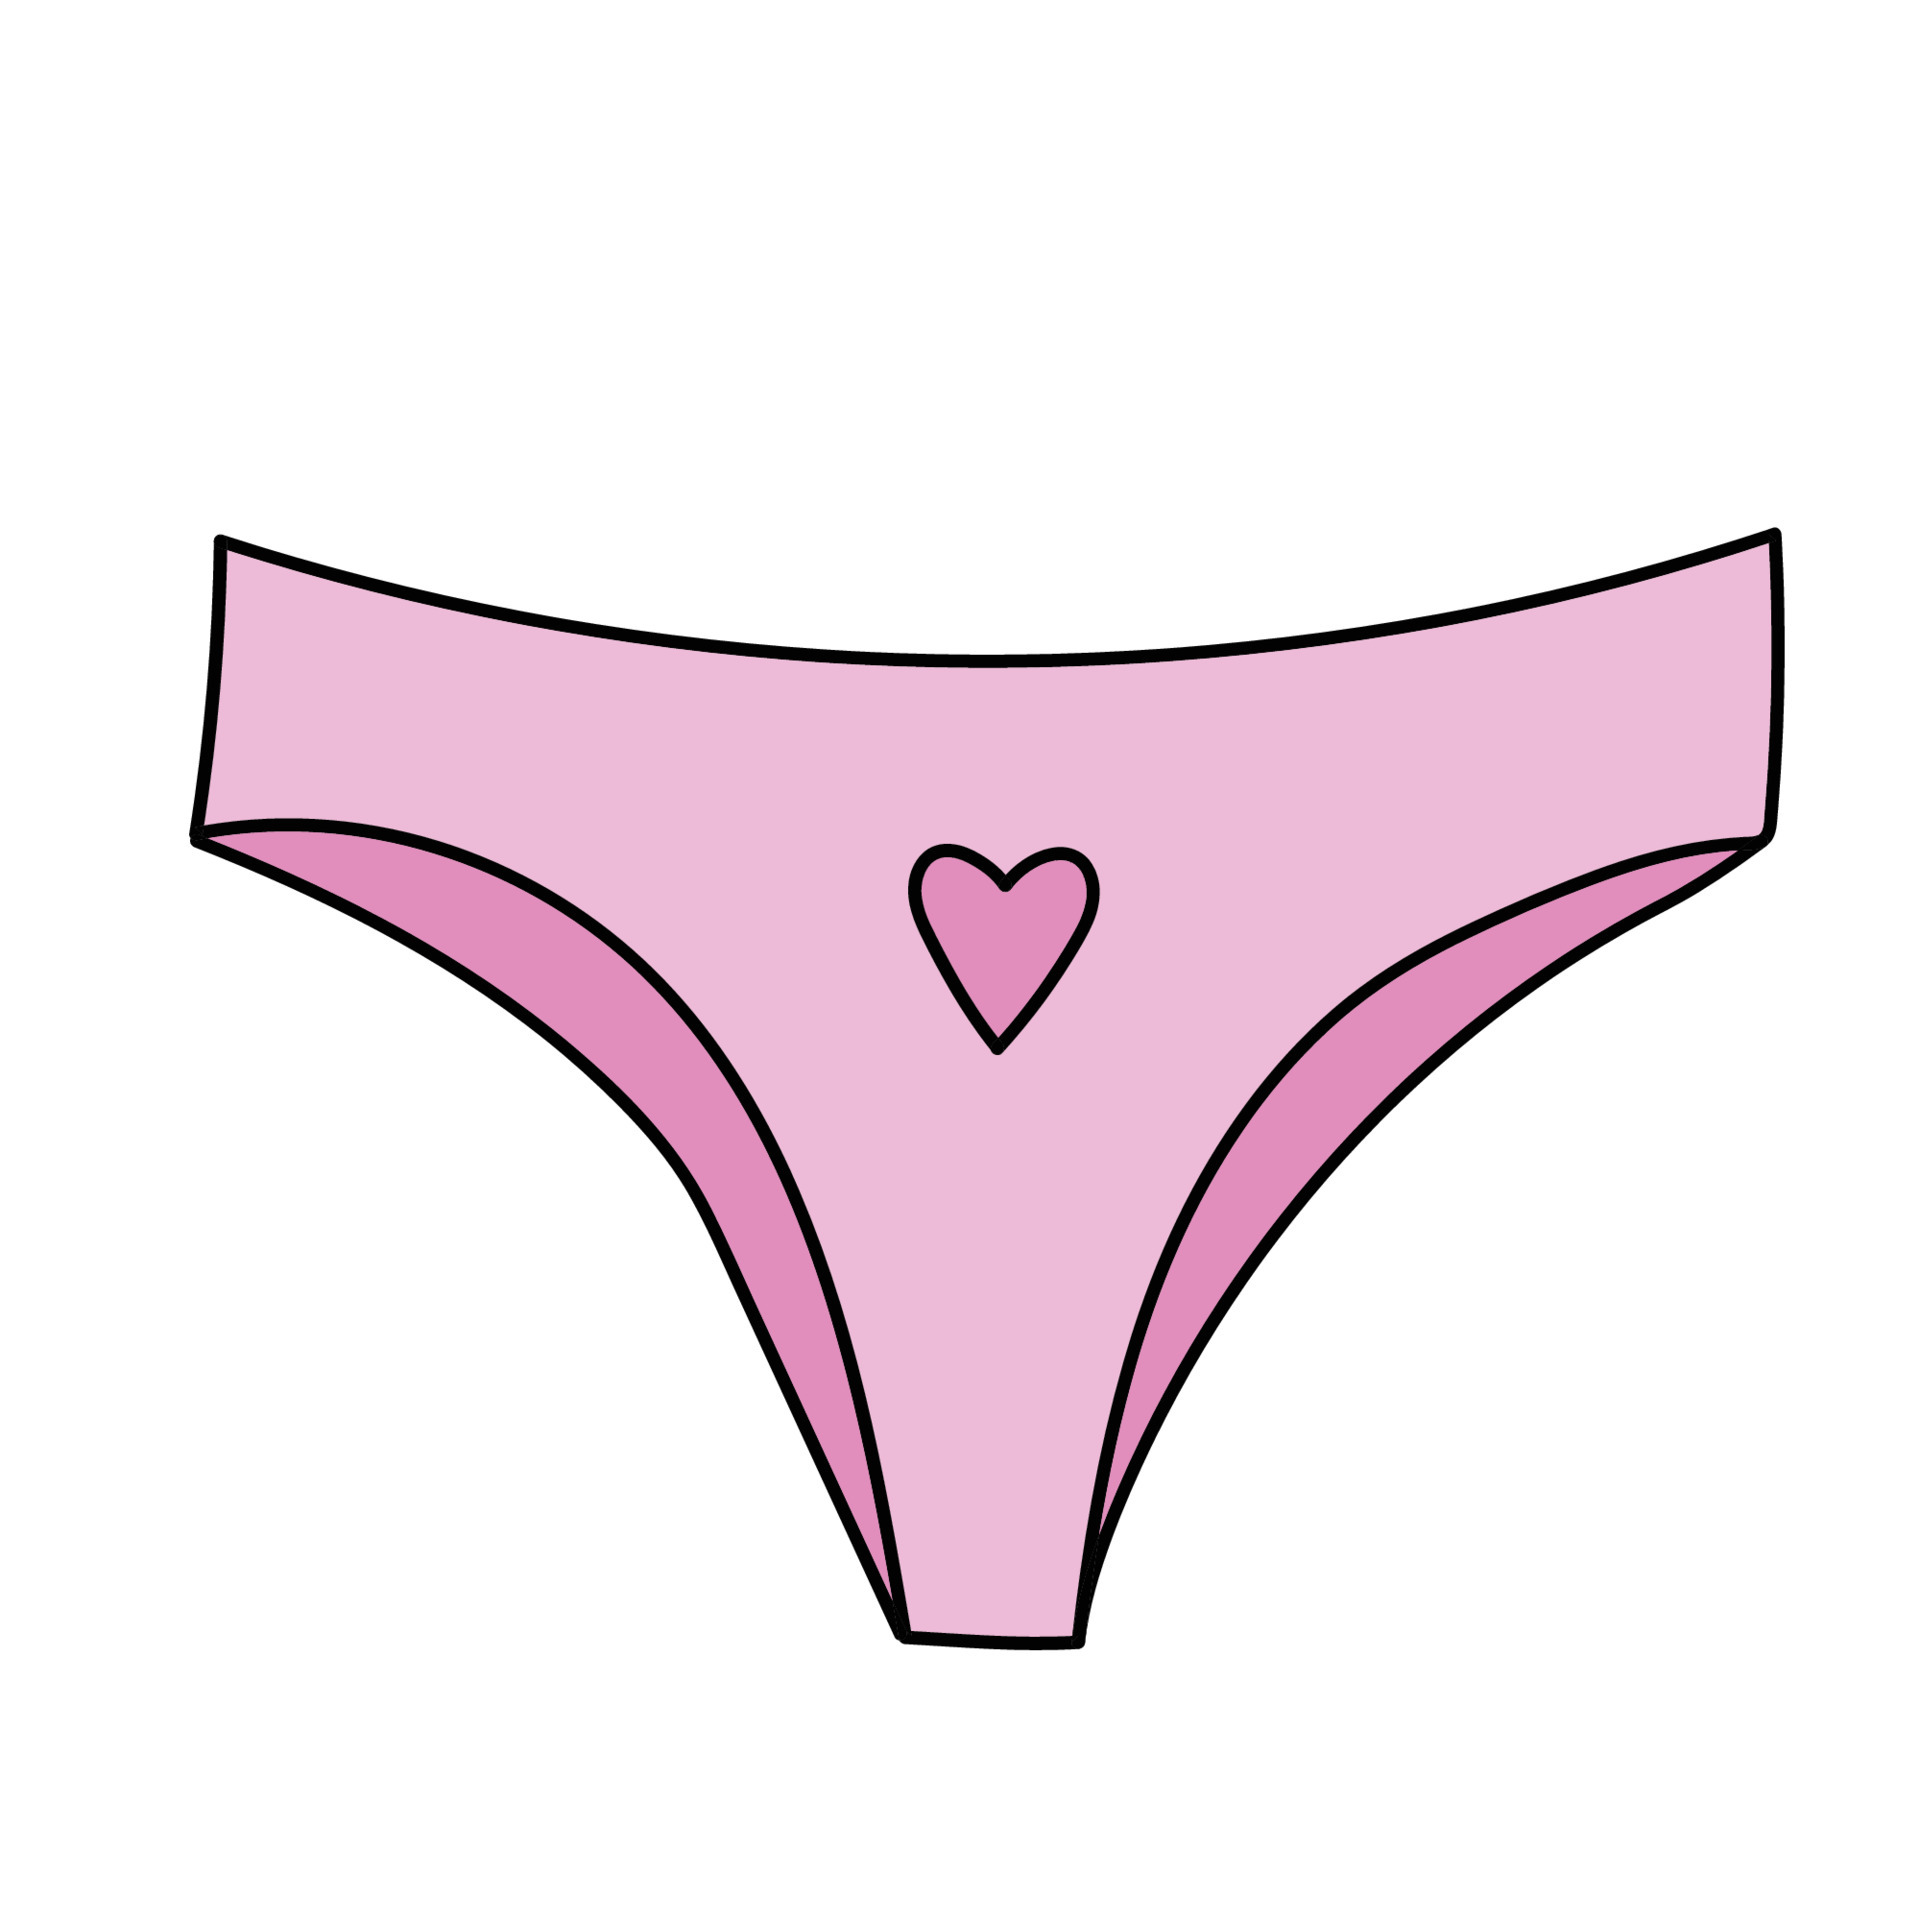 Women Underwear Illustration. Cute Girly Pink Panties. Royalty Free SVG,  Cliparts, Vectors, and Stock Illustration. Image 55913077.